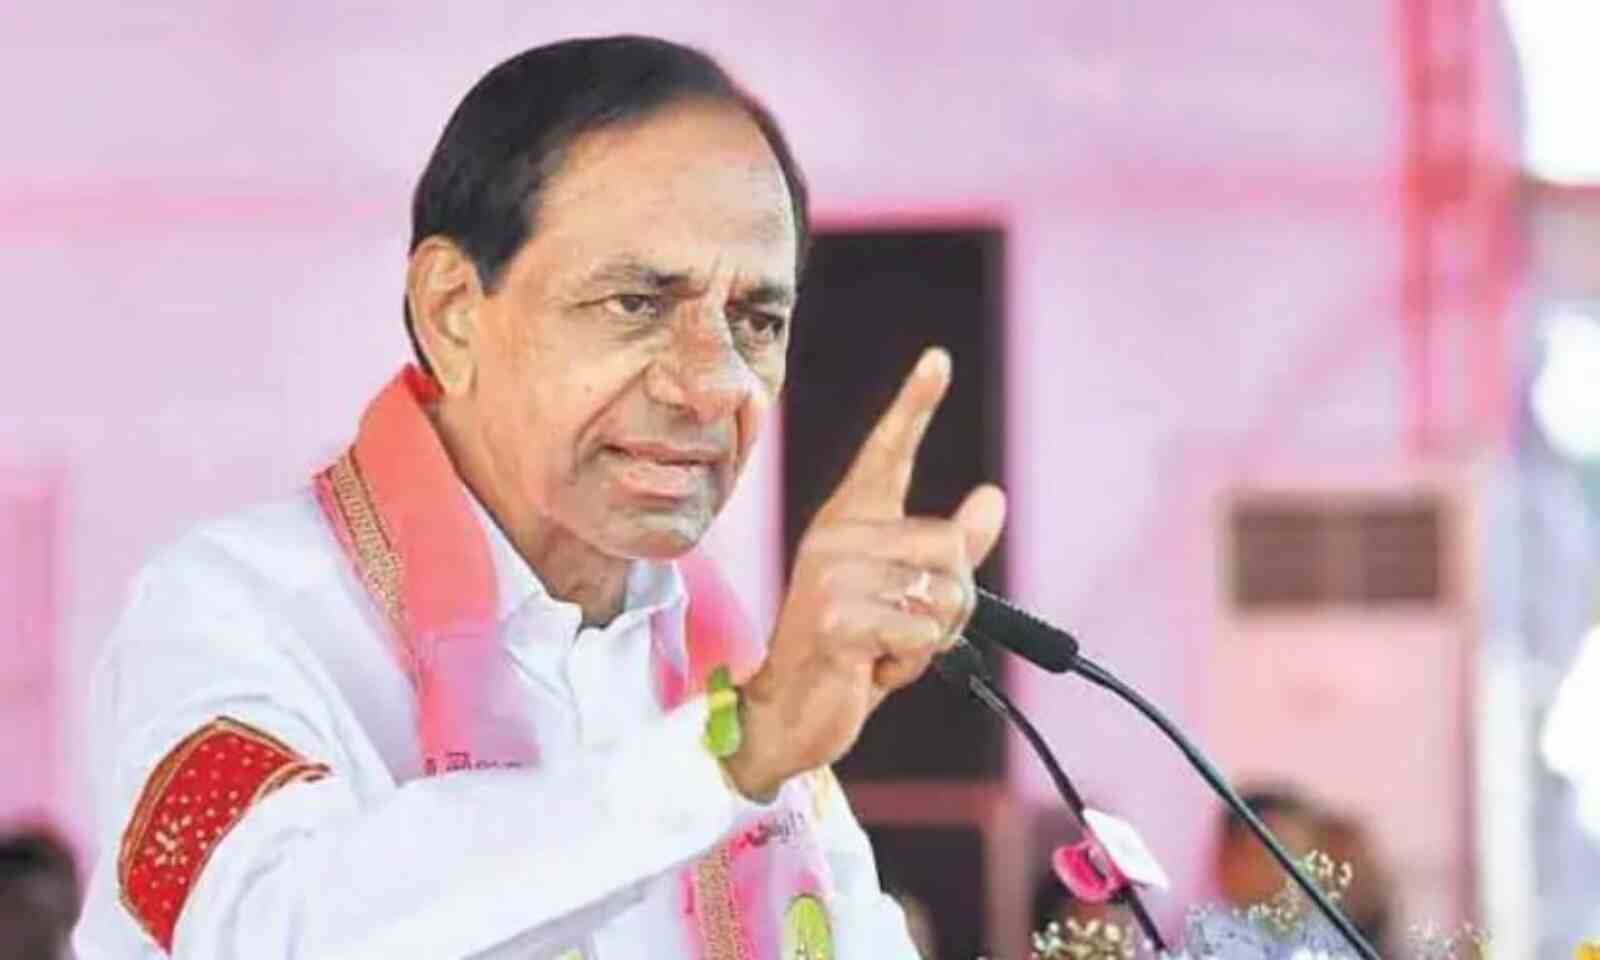 Why KCR highlighted Manmohan Singh in contrast to Modi?